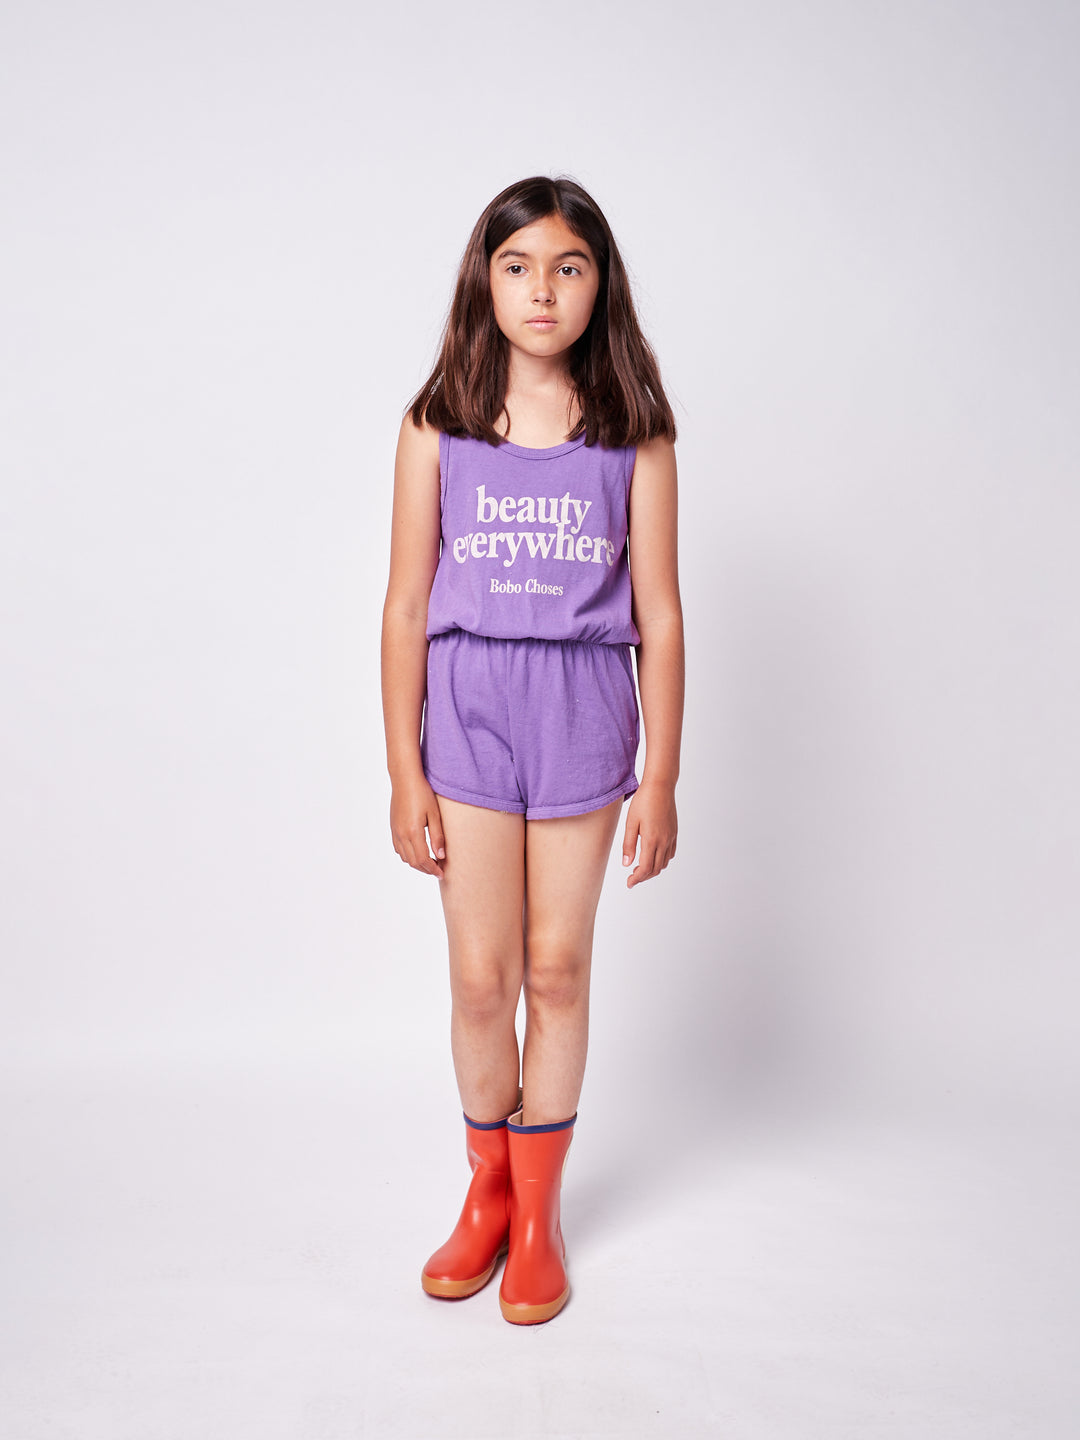 brown-haired little girl with purple bobo choses ''Beauty Everywhere'' playsuit and red rainboots